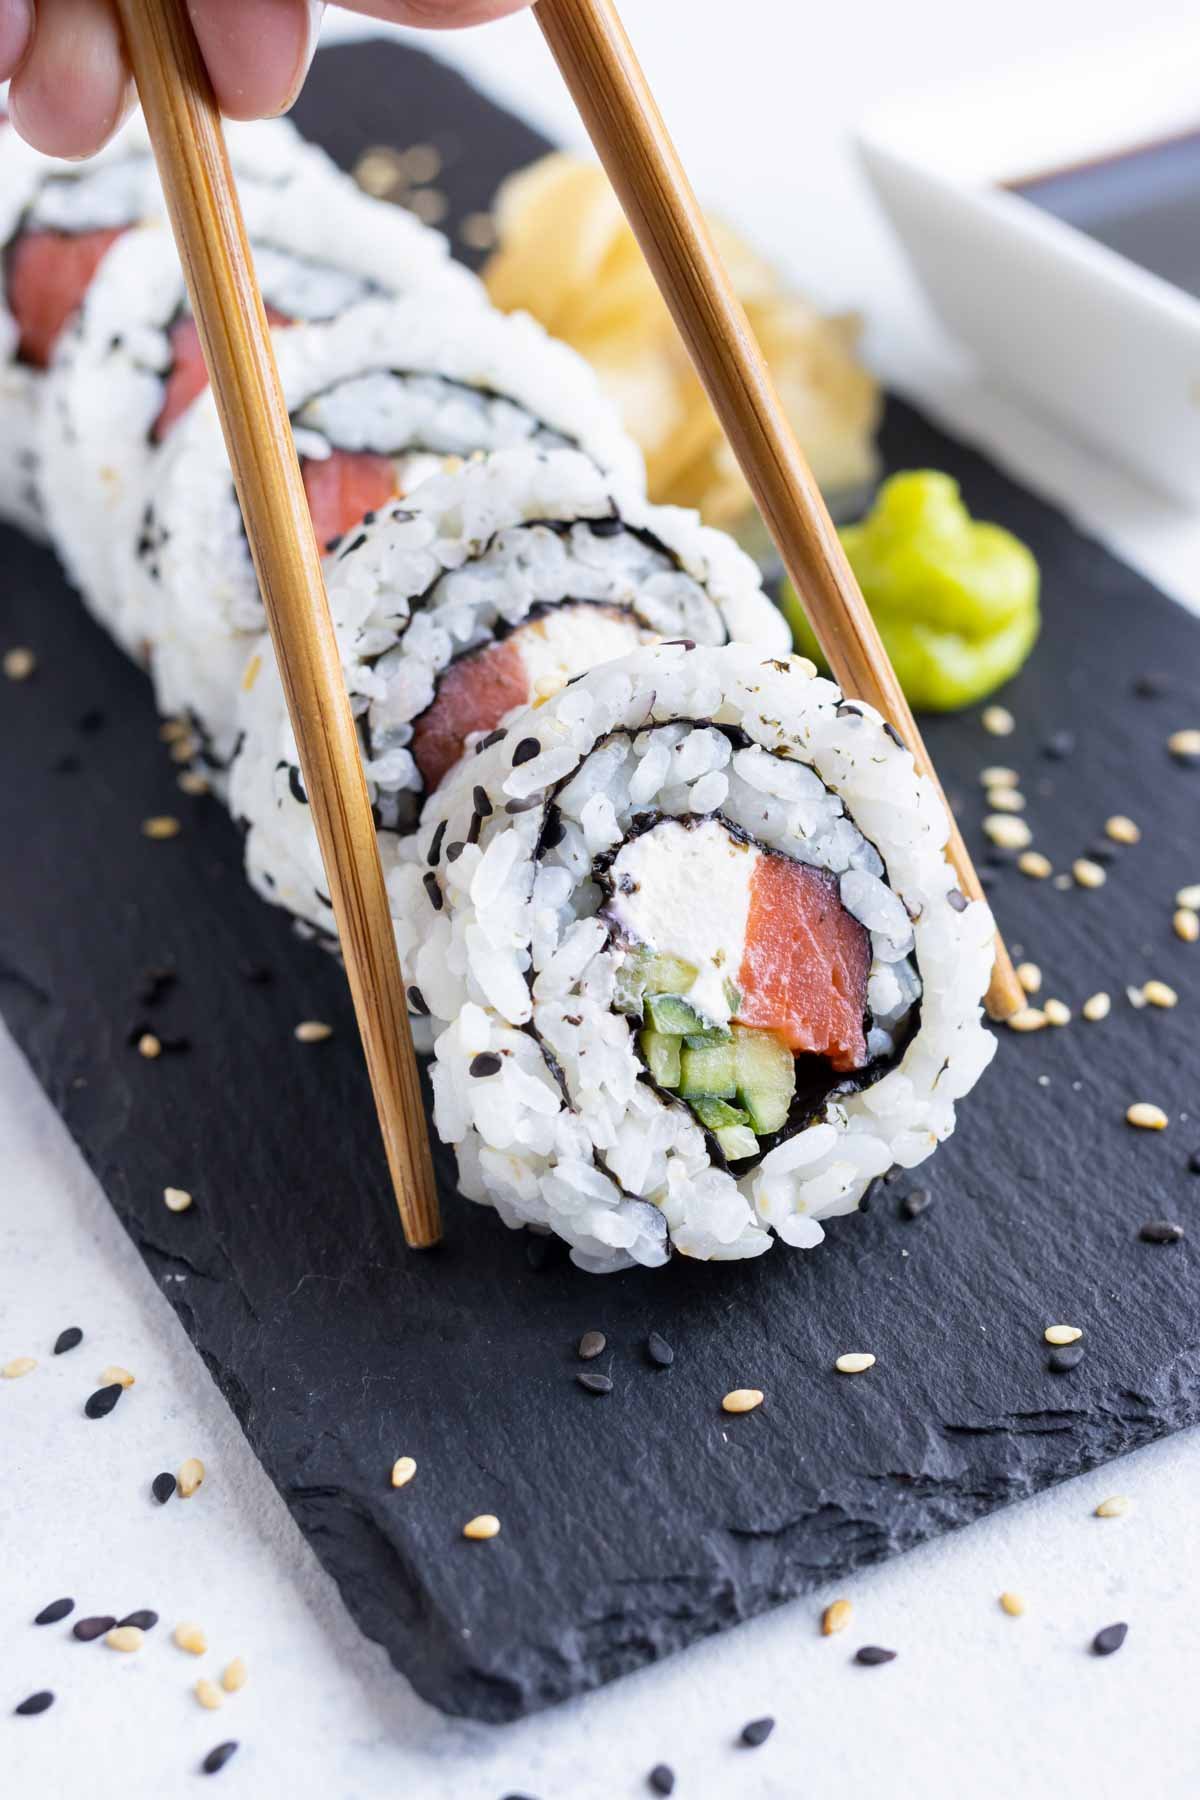 Homemade sushi is picked up with chopsticks.